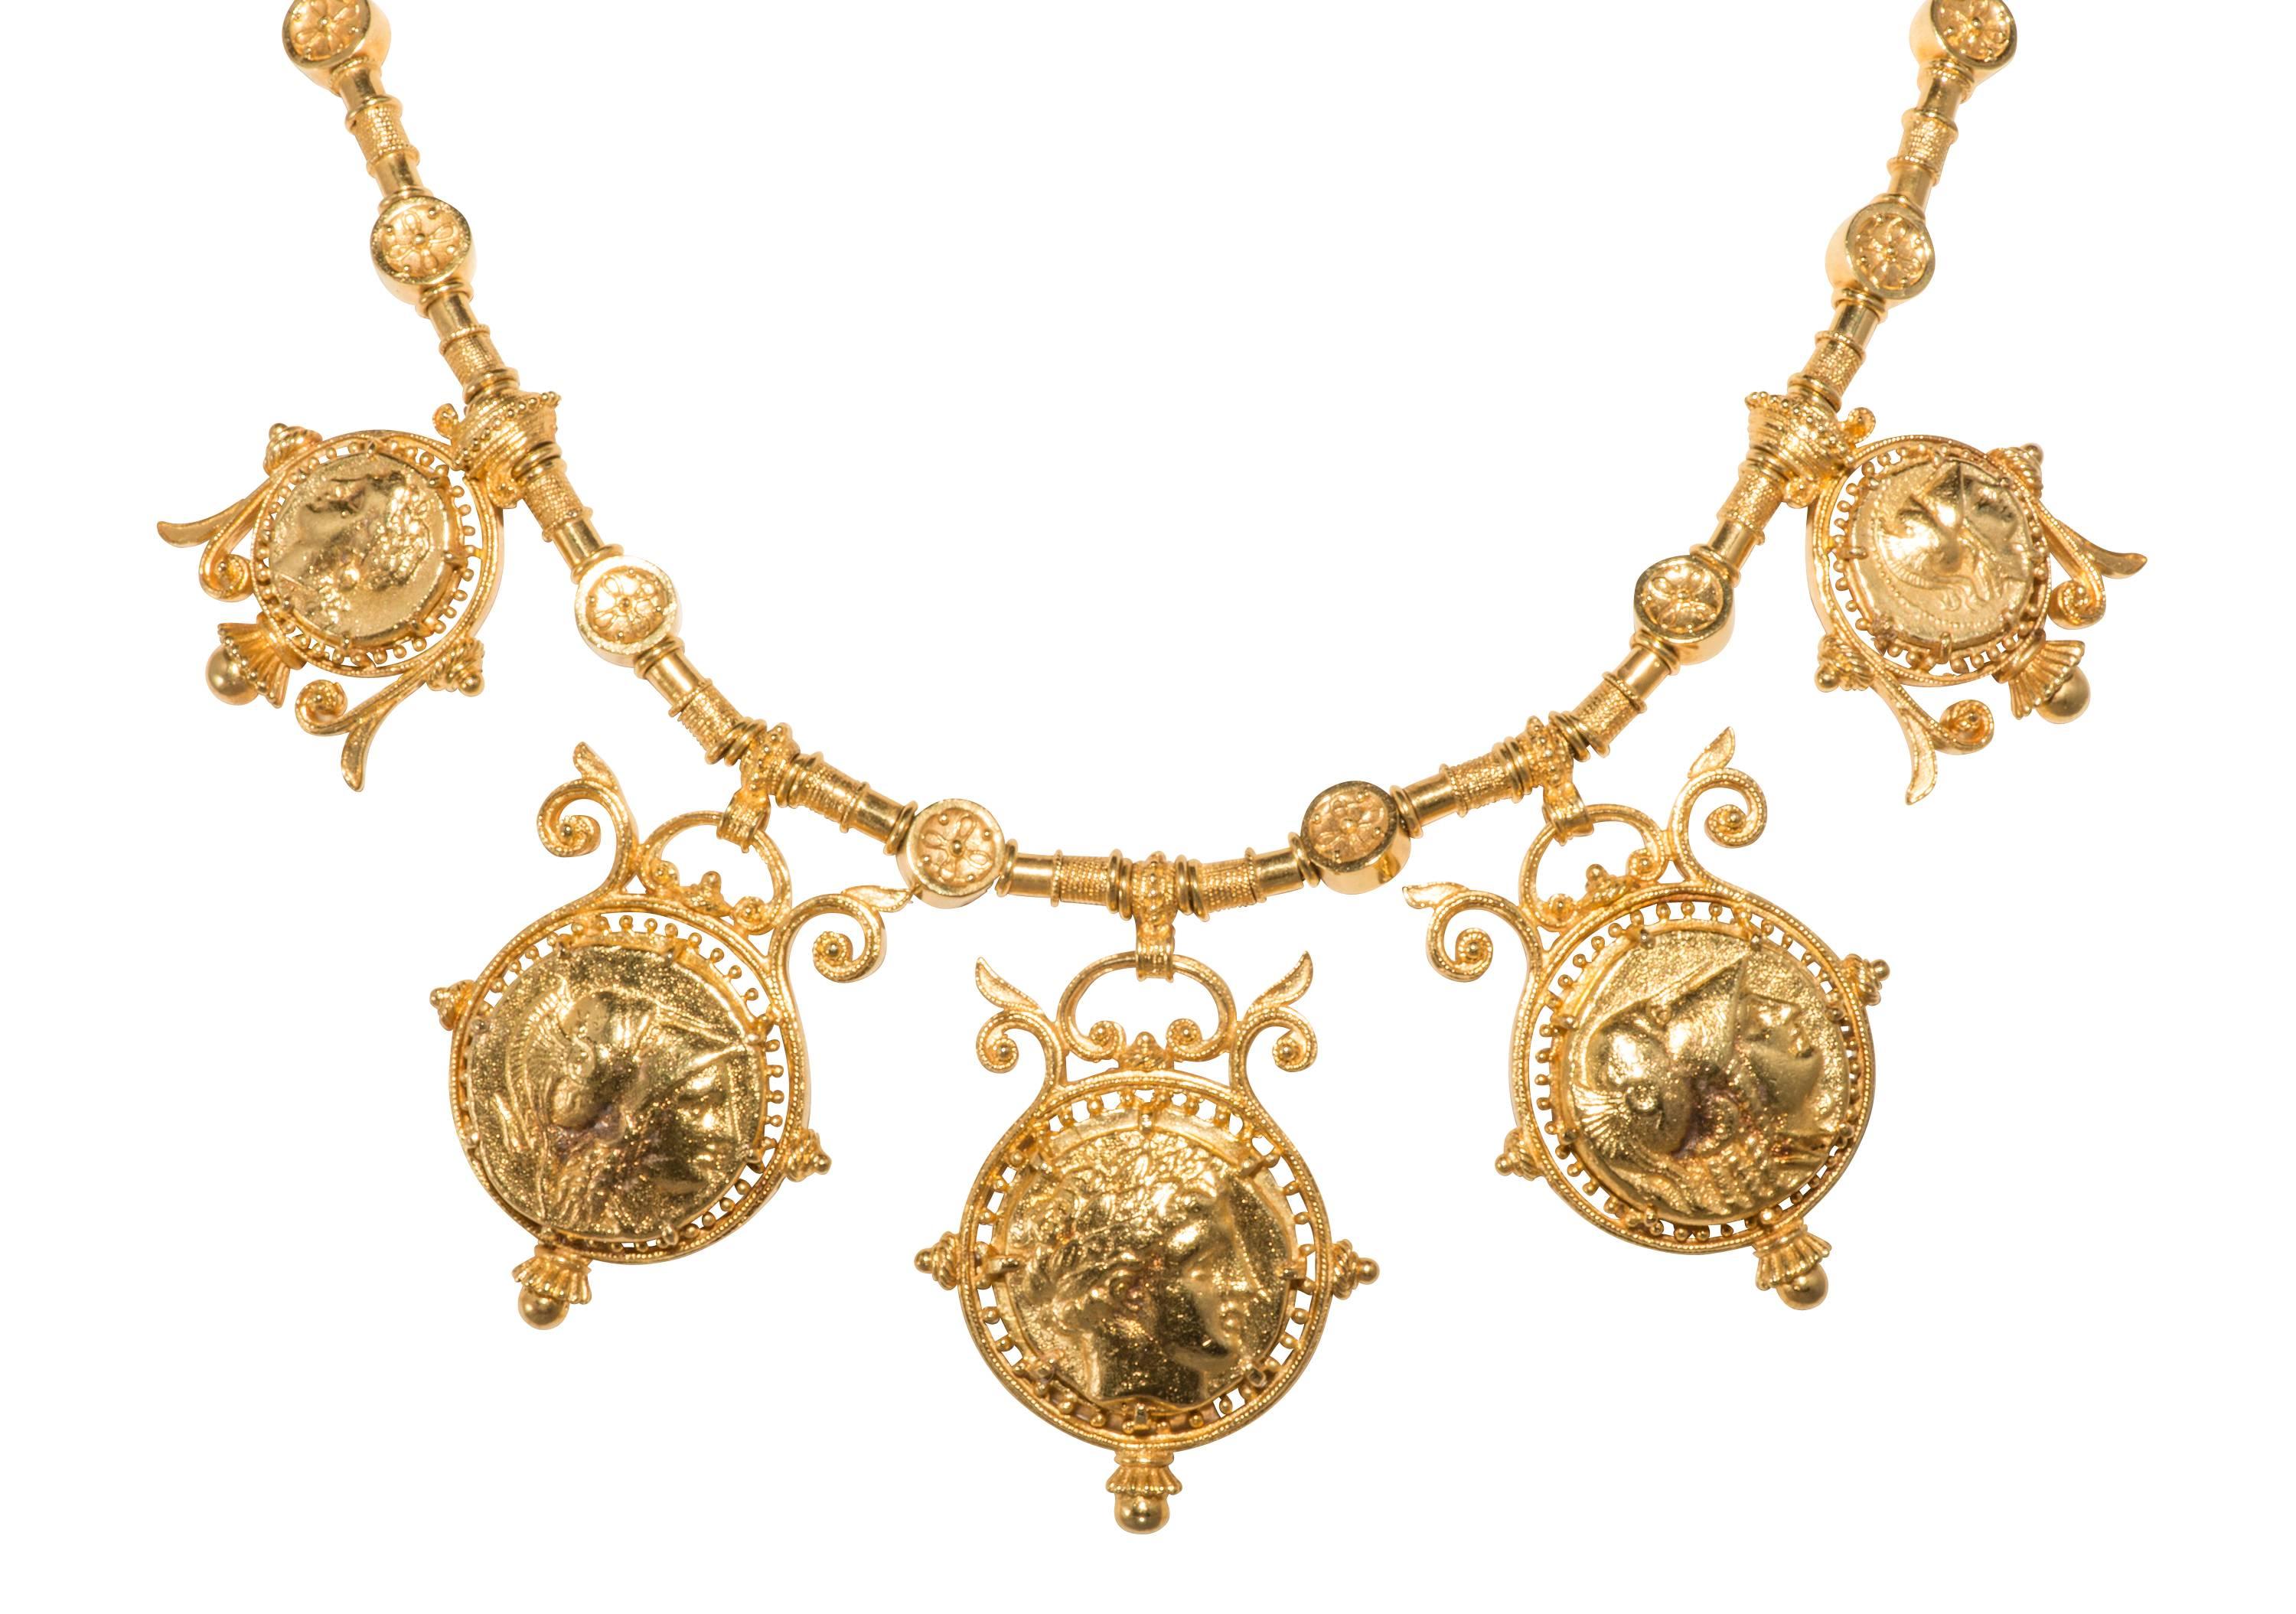 Women's Etruscan Style Coin Necklace and Earrings by Julius Cohen